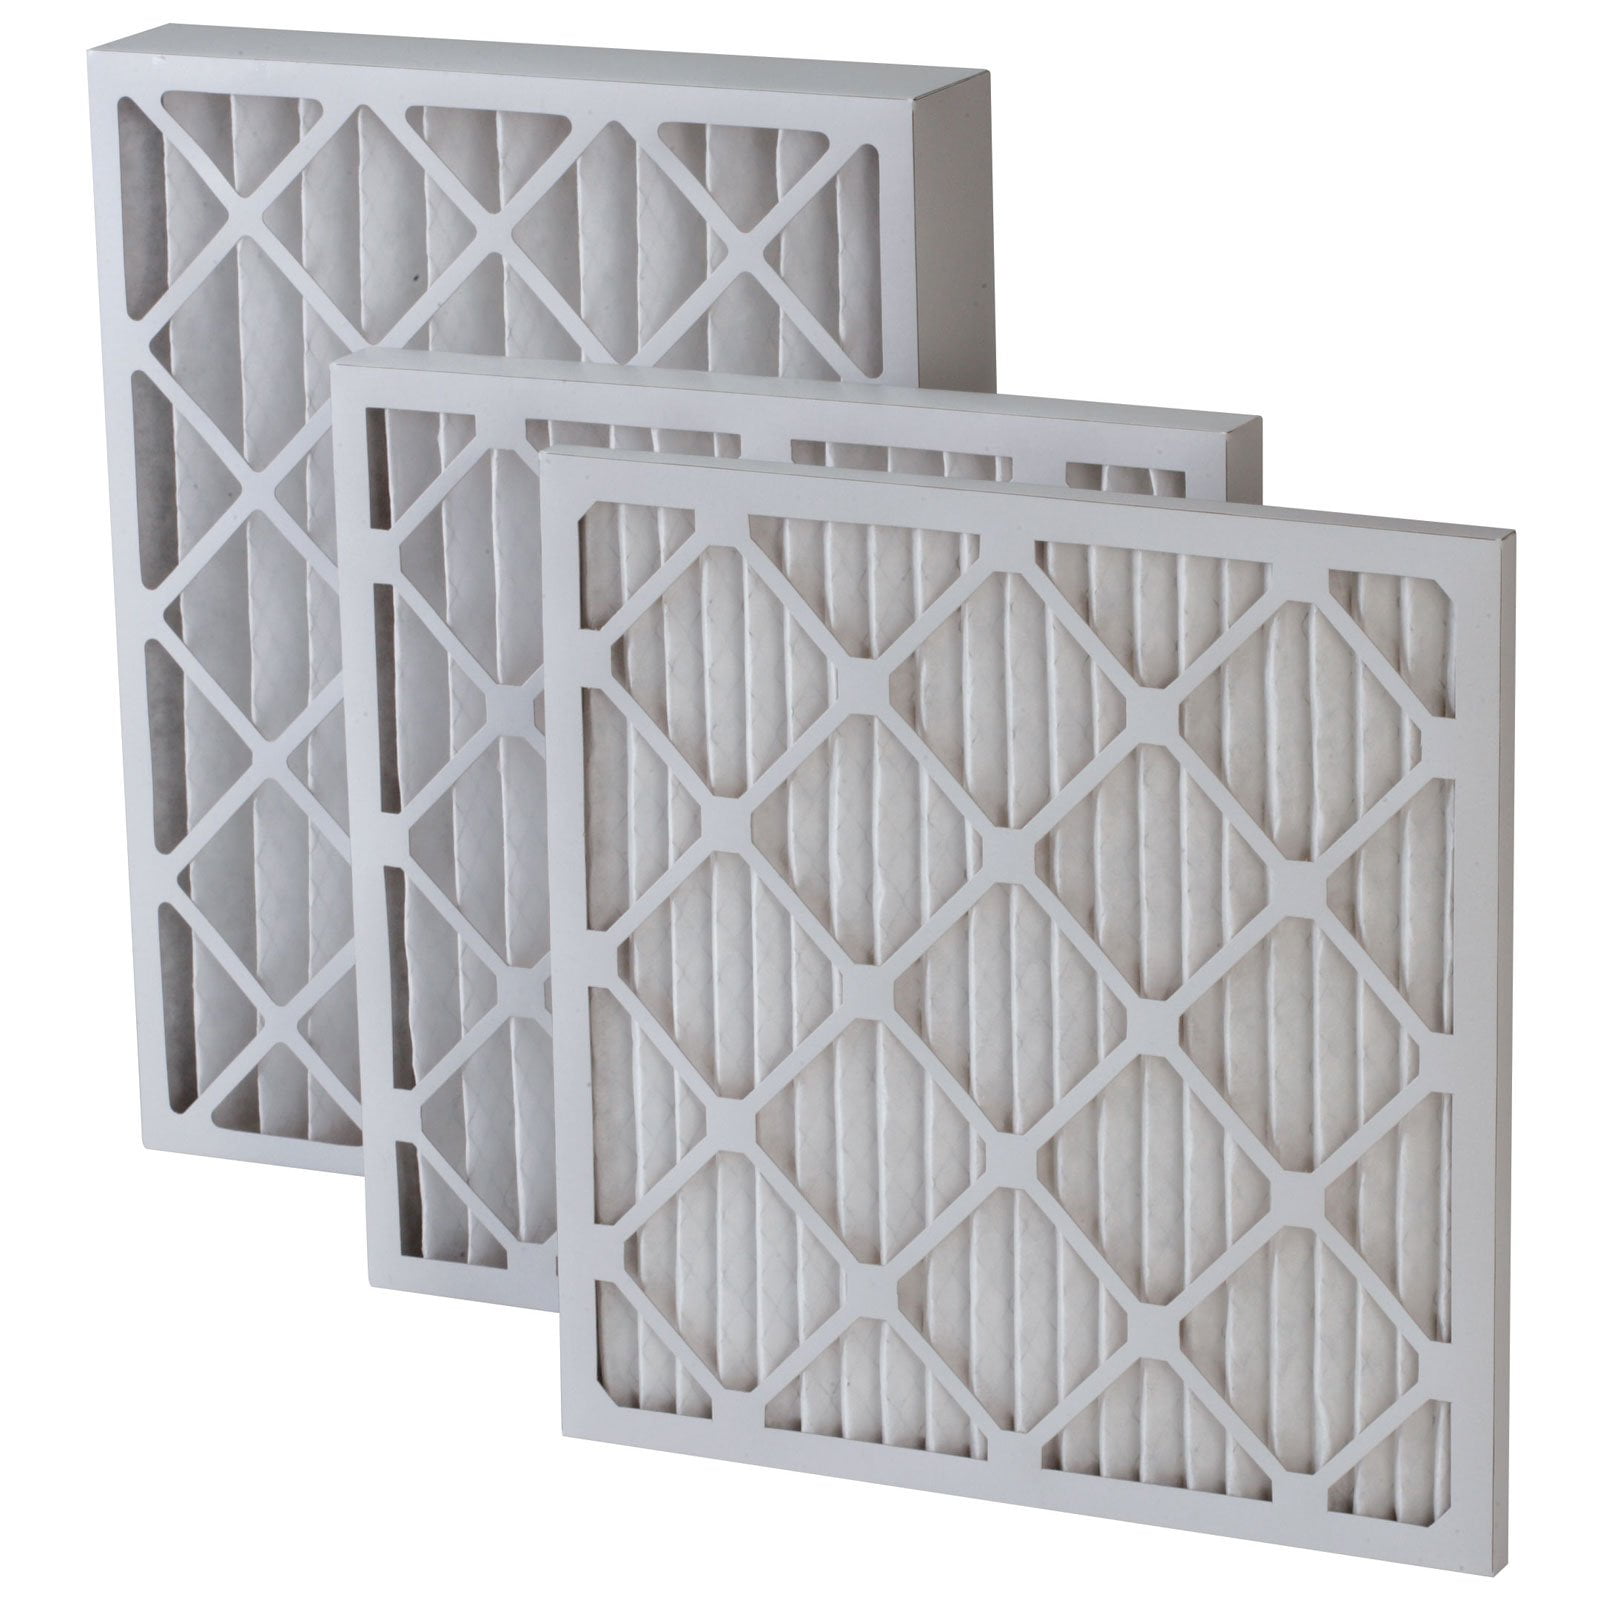 Read more about the article Furnace Filter